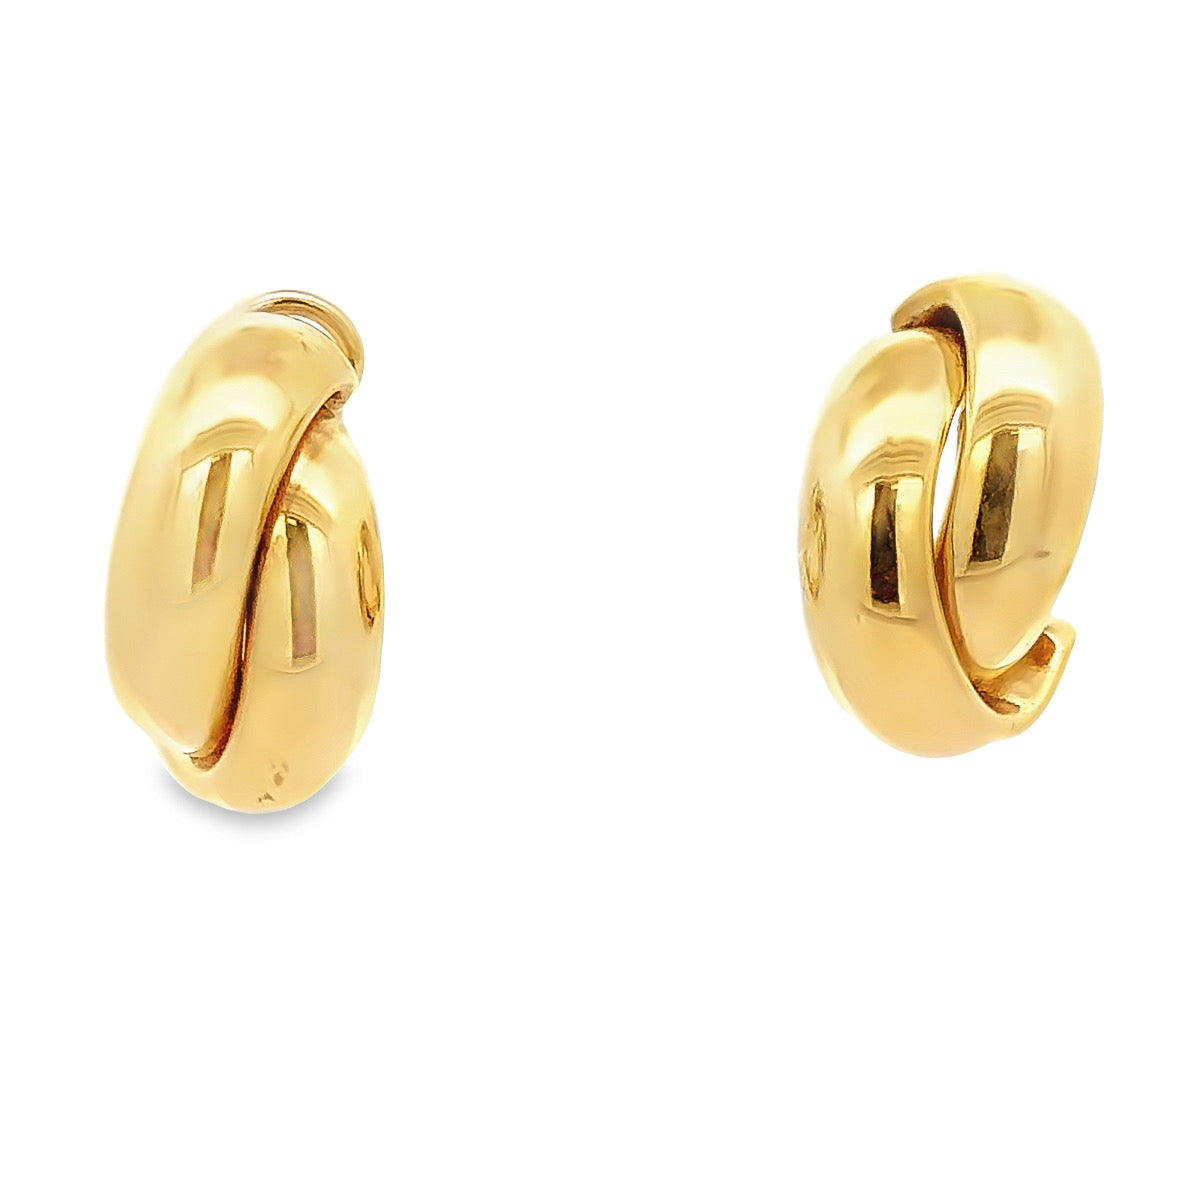 18K Polished Yellow Gold Hoop French-Clip Earrings